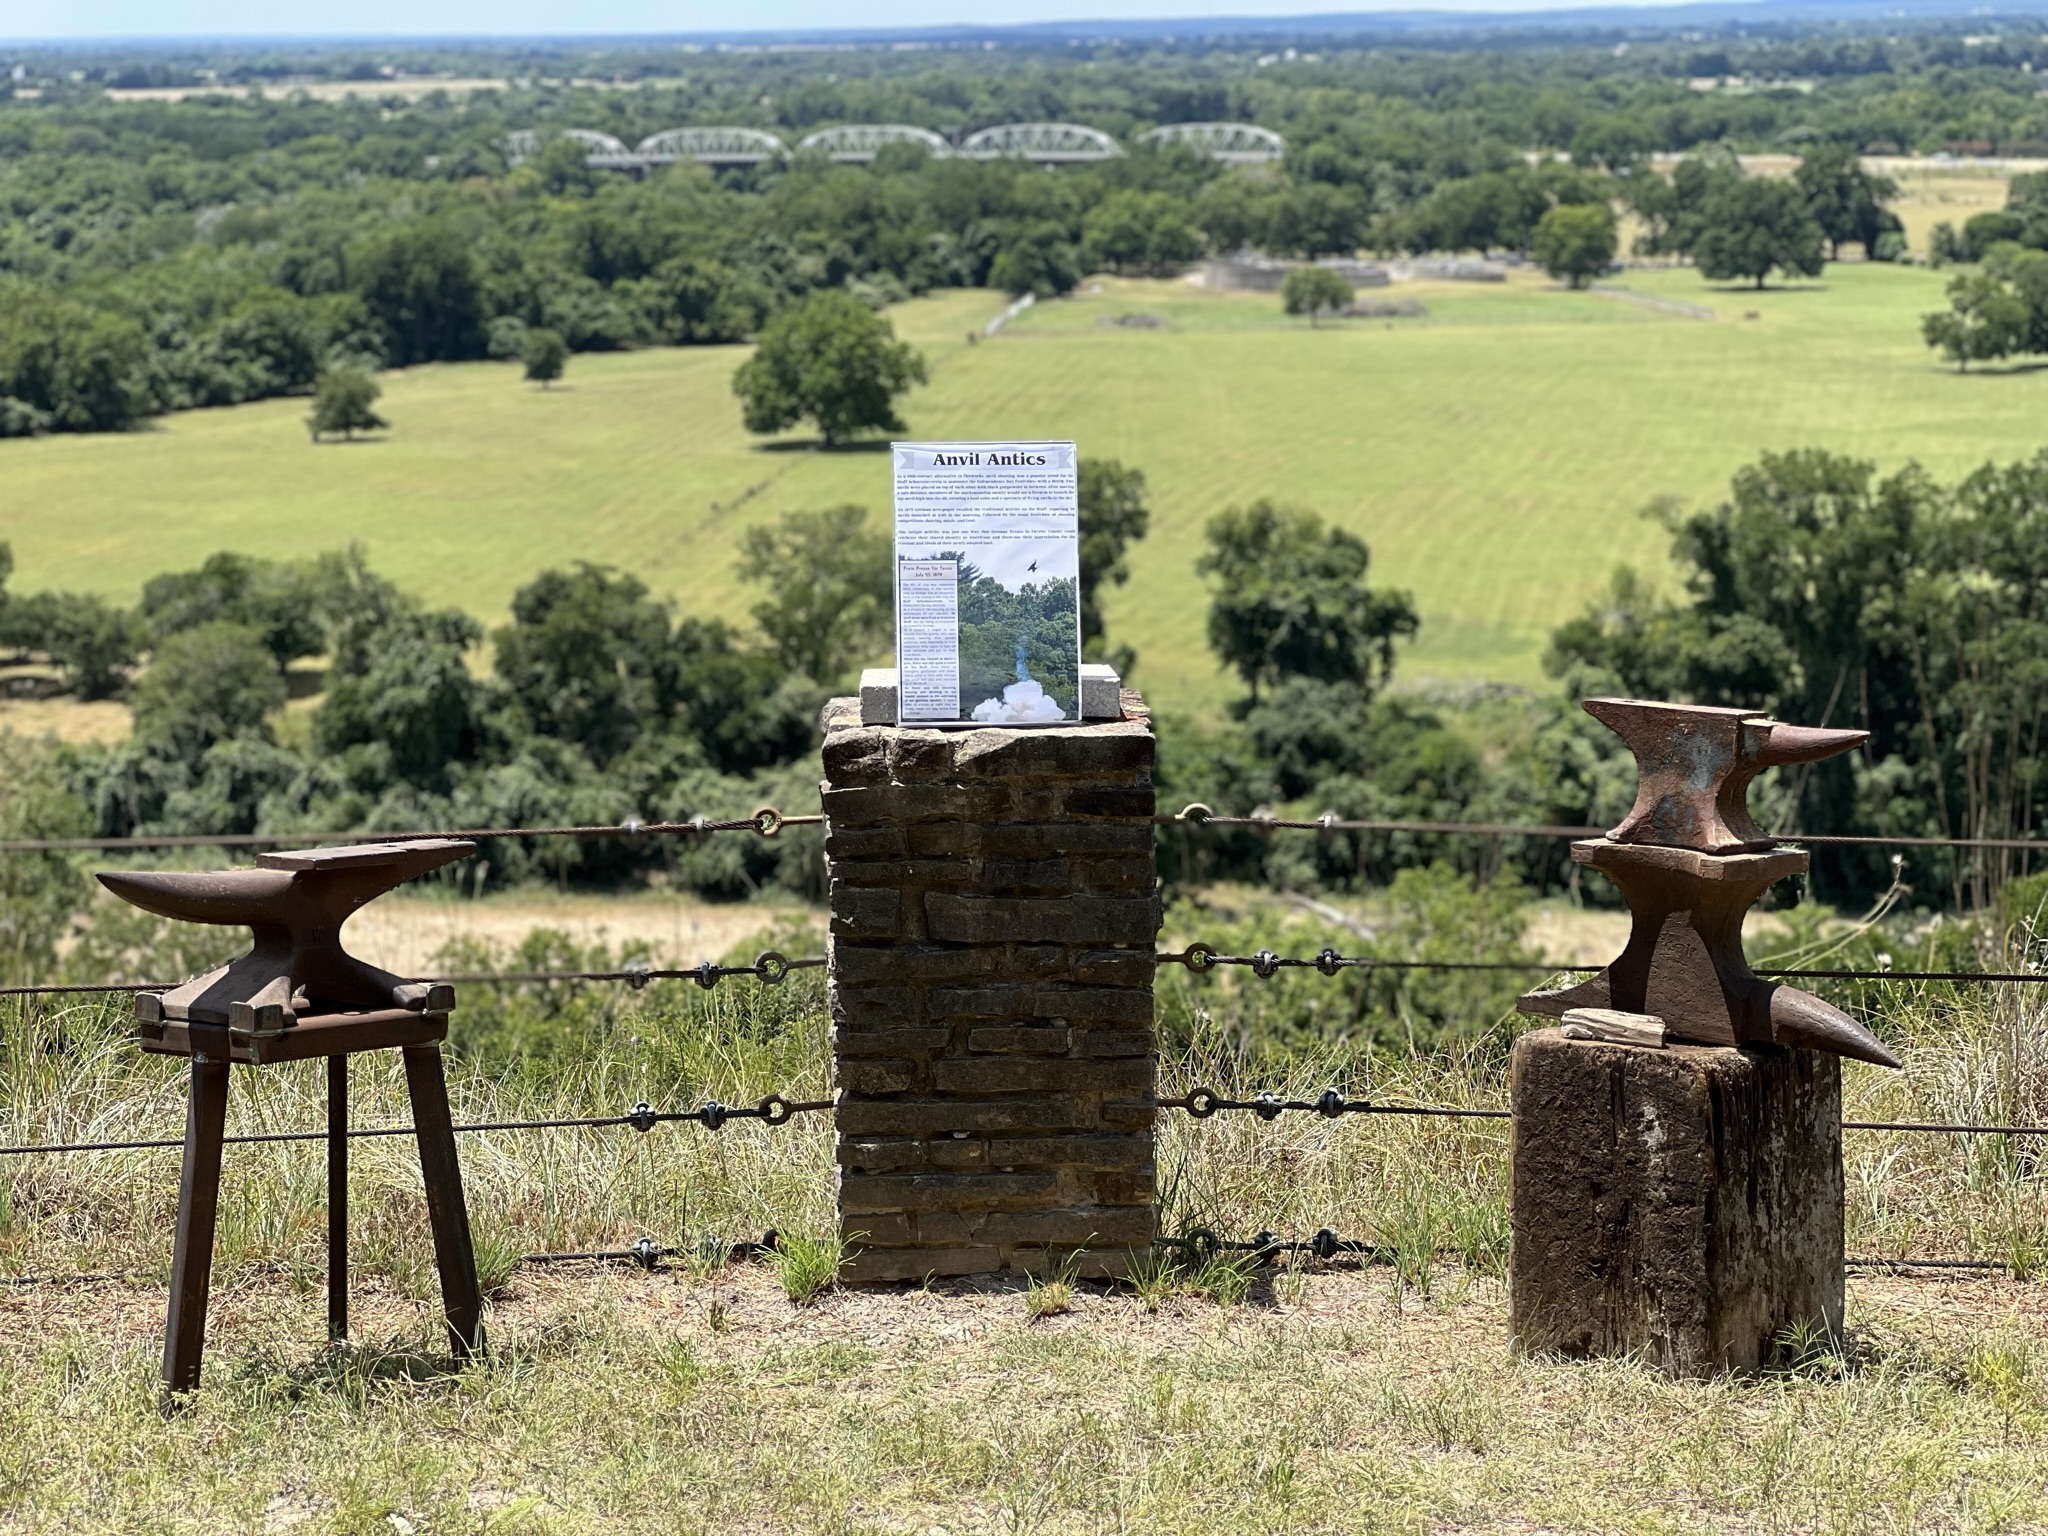 Two anvils on stands with an interpretive sign in the middle